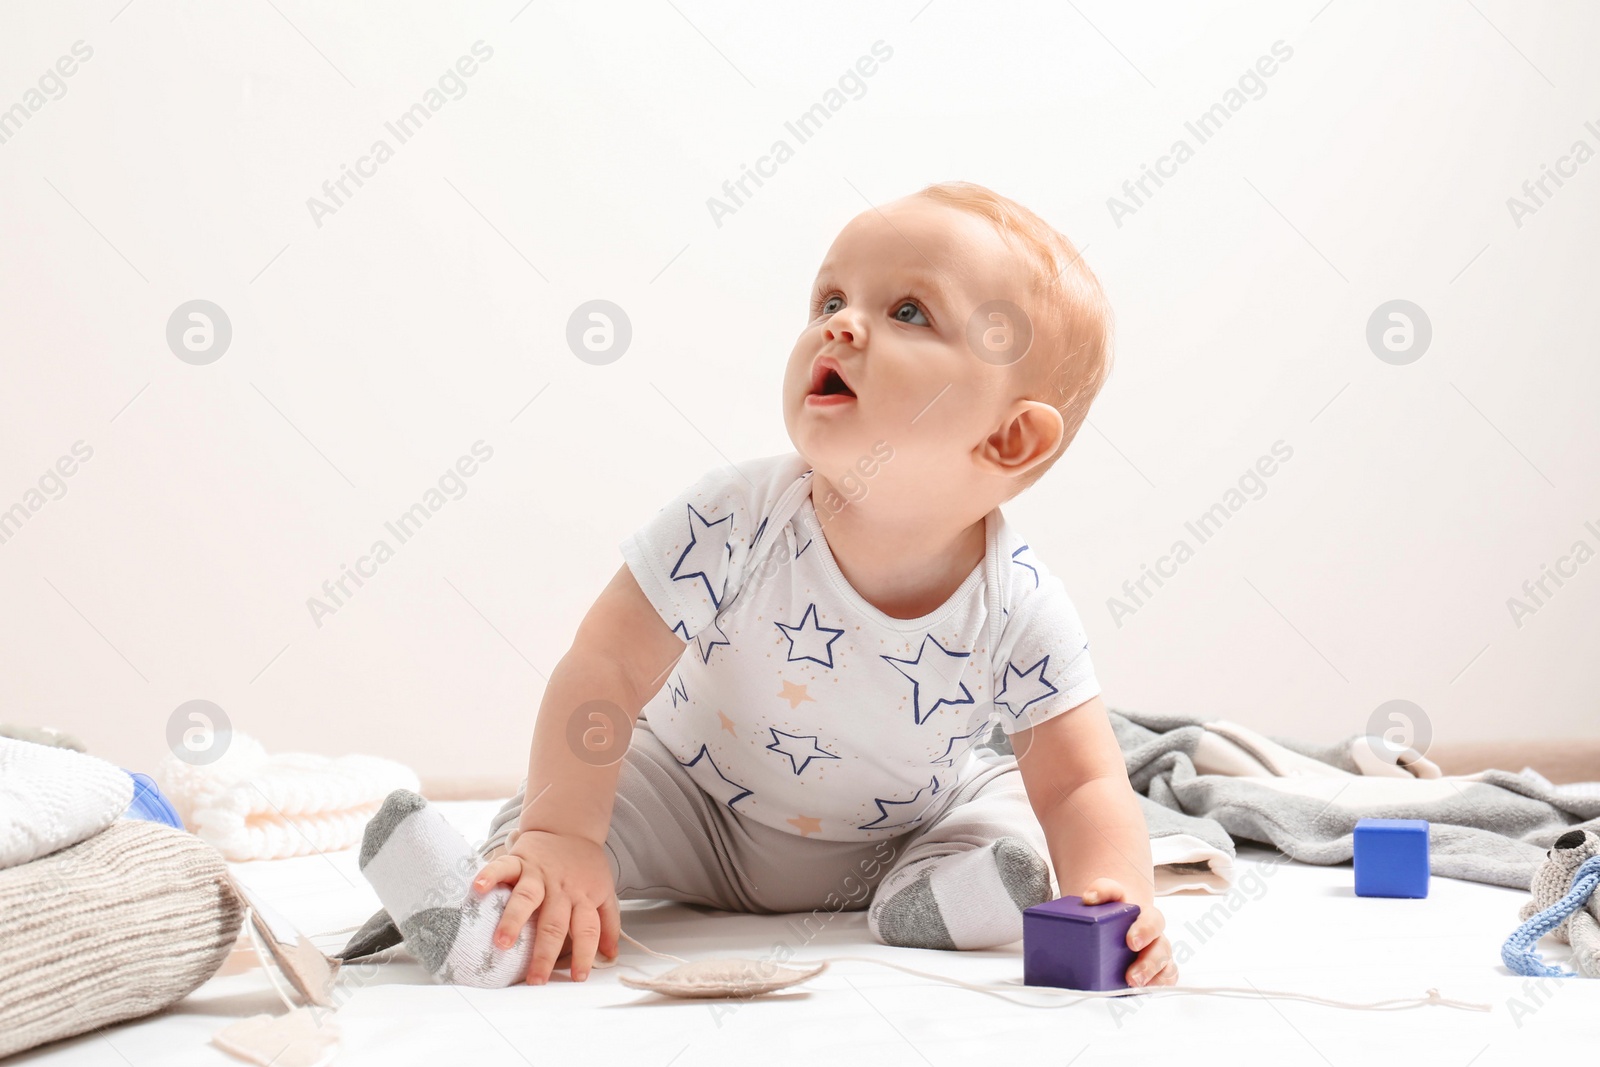 Photo of Little boy in cute clothes sitting on floor against light background. Baby accessories